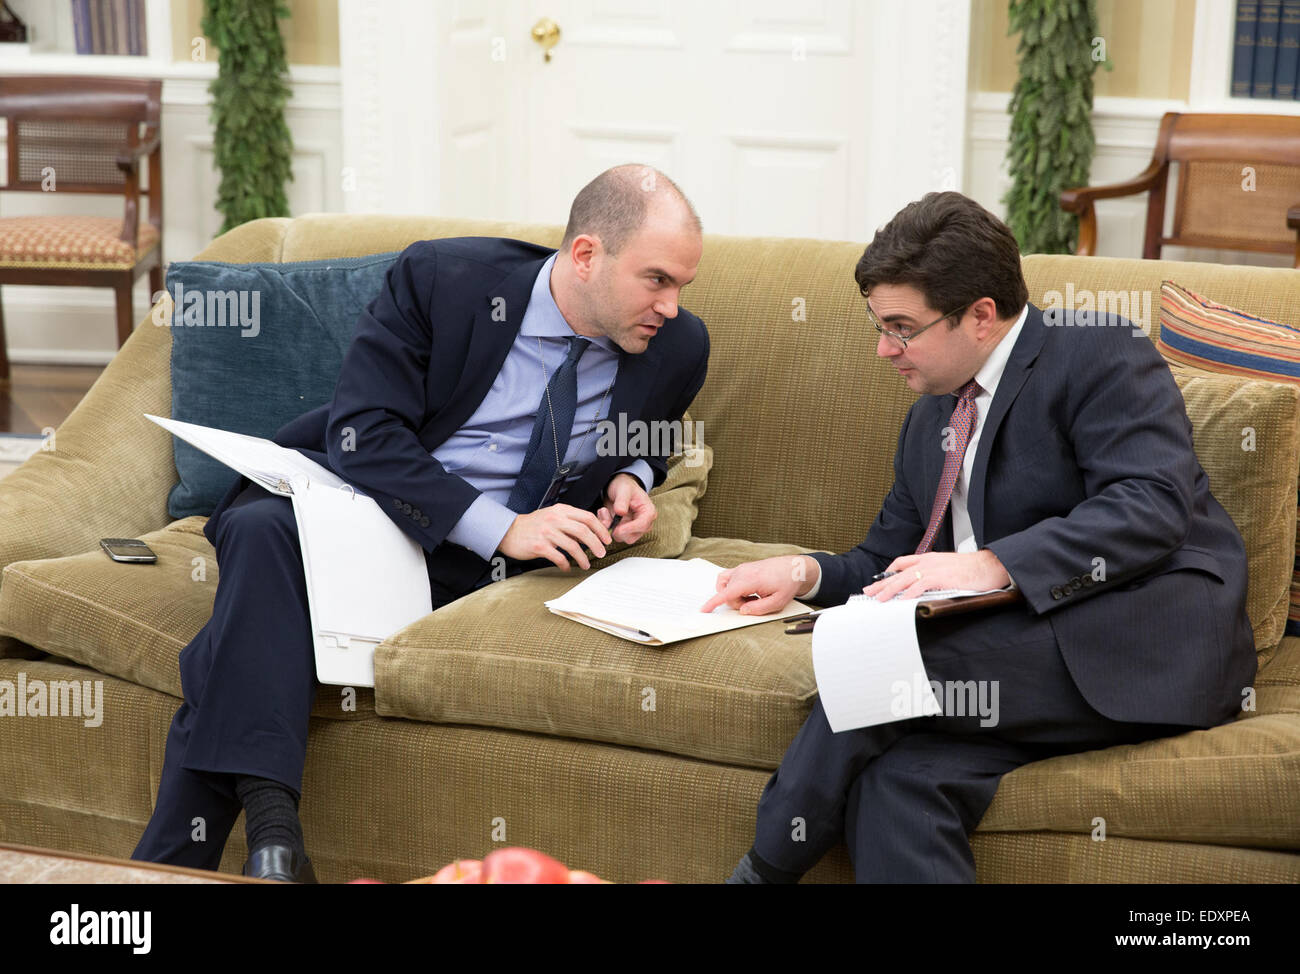 Deputy National Security Advisor Ben Rhodes, left, confers with Ricardo Zuniga, National Security Council's Senior Director for Western Hemisphere Affairs, during President Barack Obama's phone call with President Raúl Castro of Cuba, in the Oval Office, Dec. 16, 2014. Stock Photo